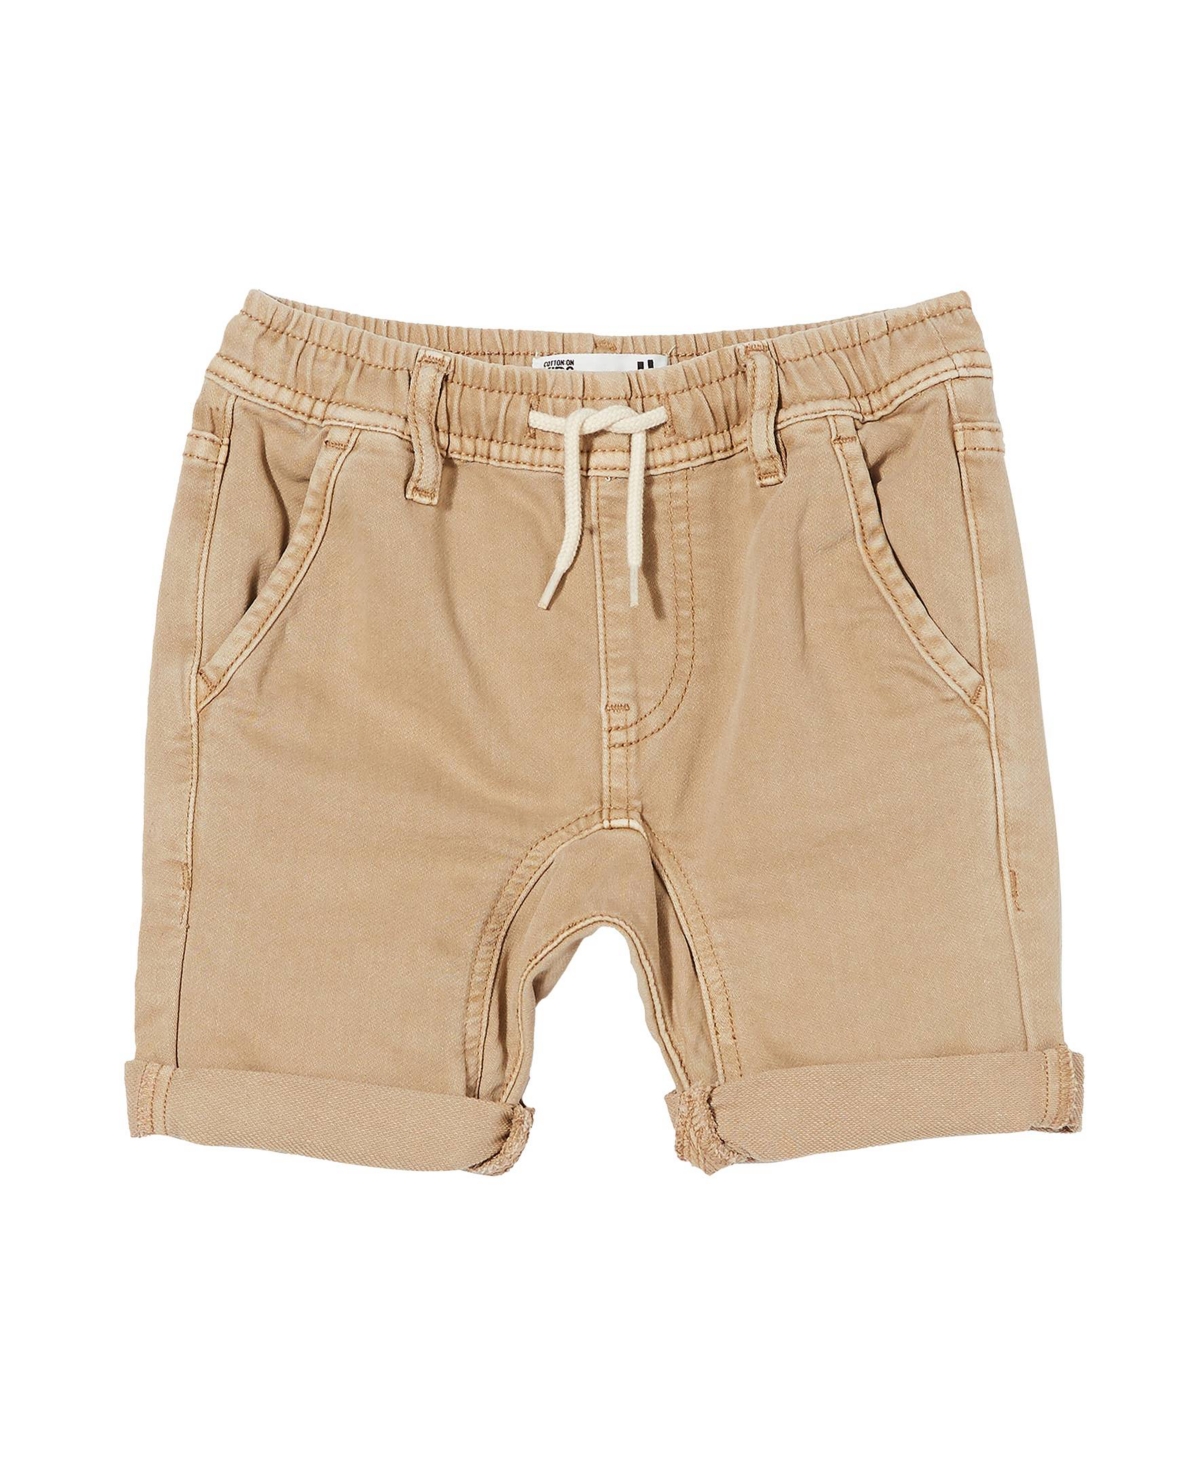 COTTON ON TODDLER BOYS SLOUCH FIT SHORTS